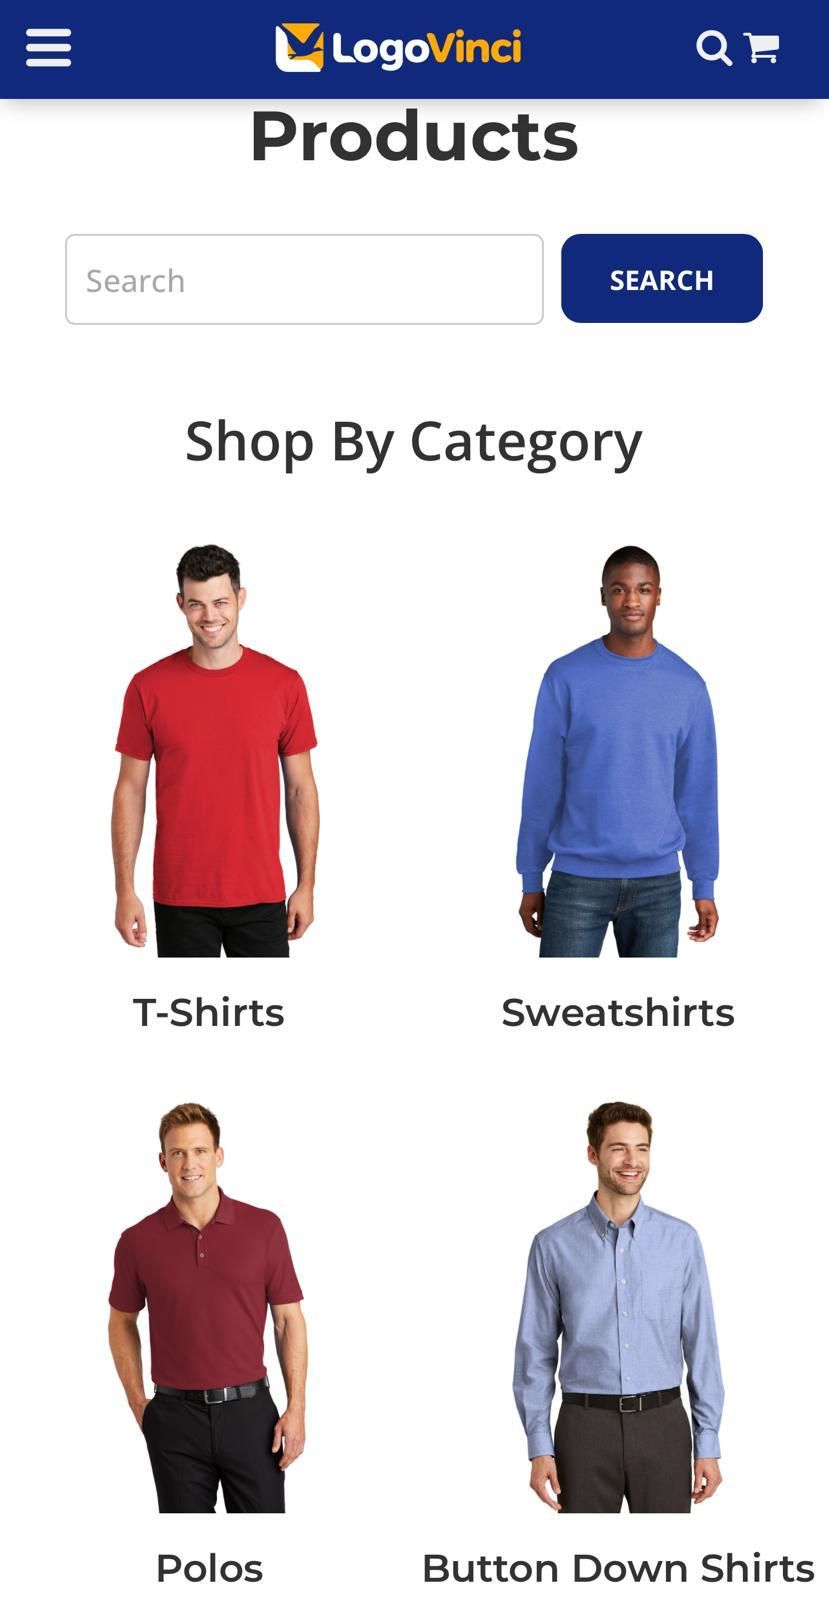 A screenshot of a website showing a variety of men 's clothing.